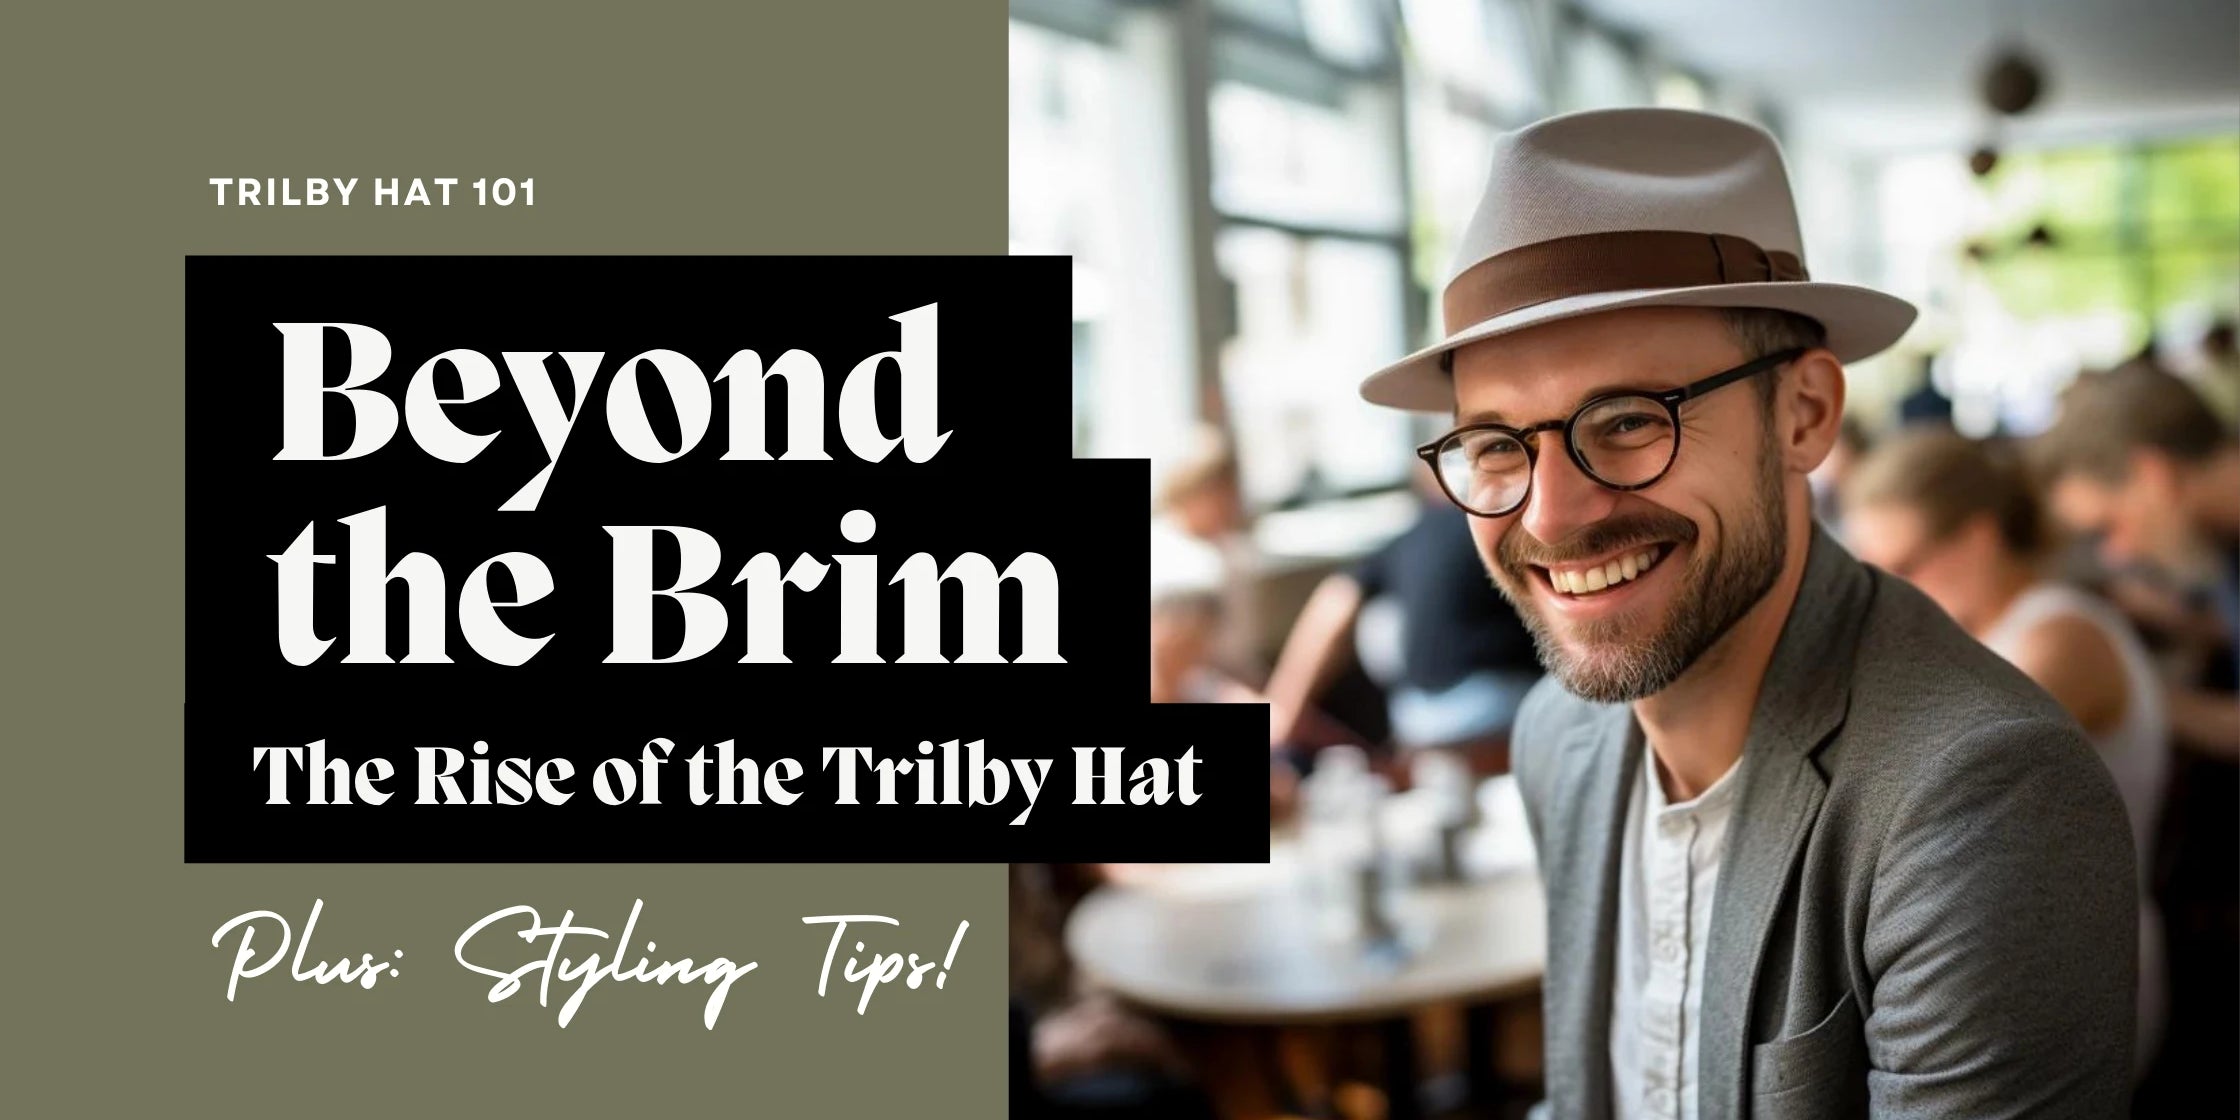 Smiling man wearing a trilby hat sitting in a cafe, with text overlay that reads 'TRILBY HAT 101, Beyond the Brim: The Rise of the Trilby Hat, Plus: Styling Tips!'.